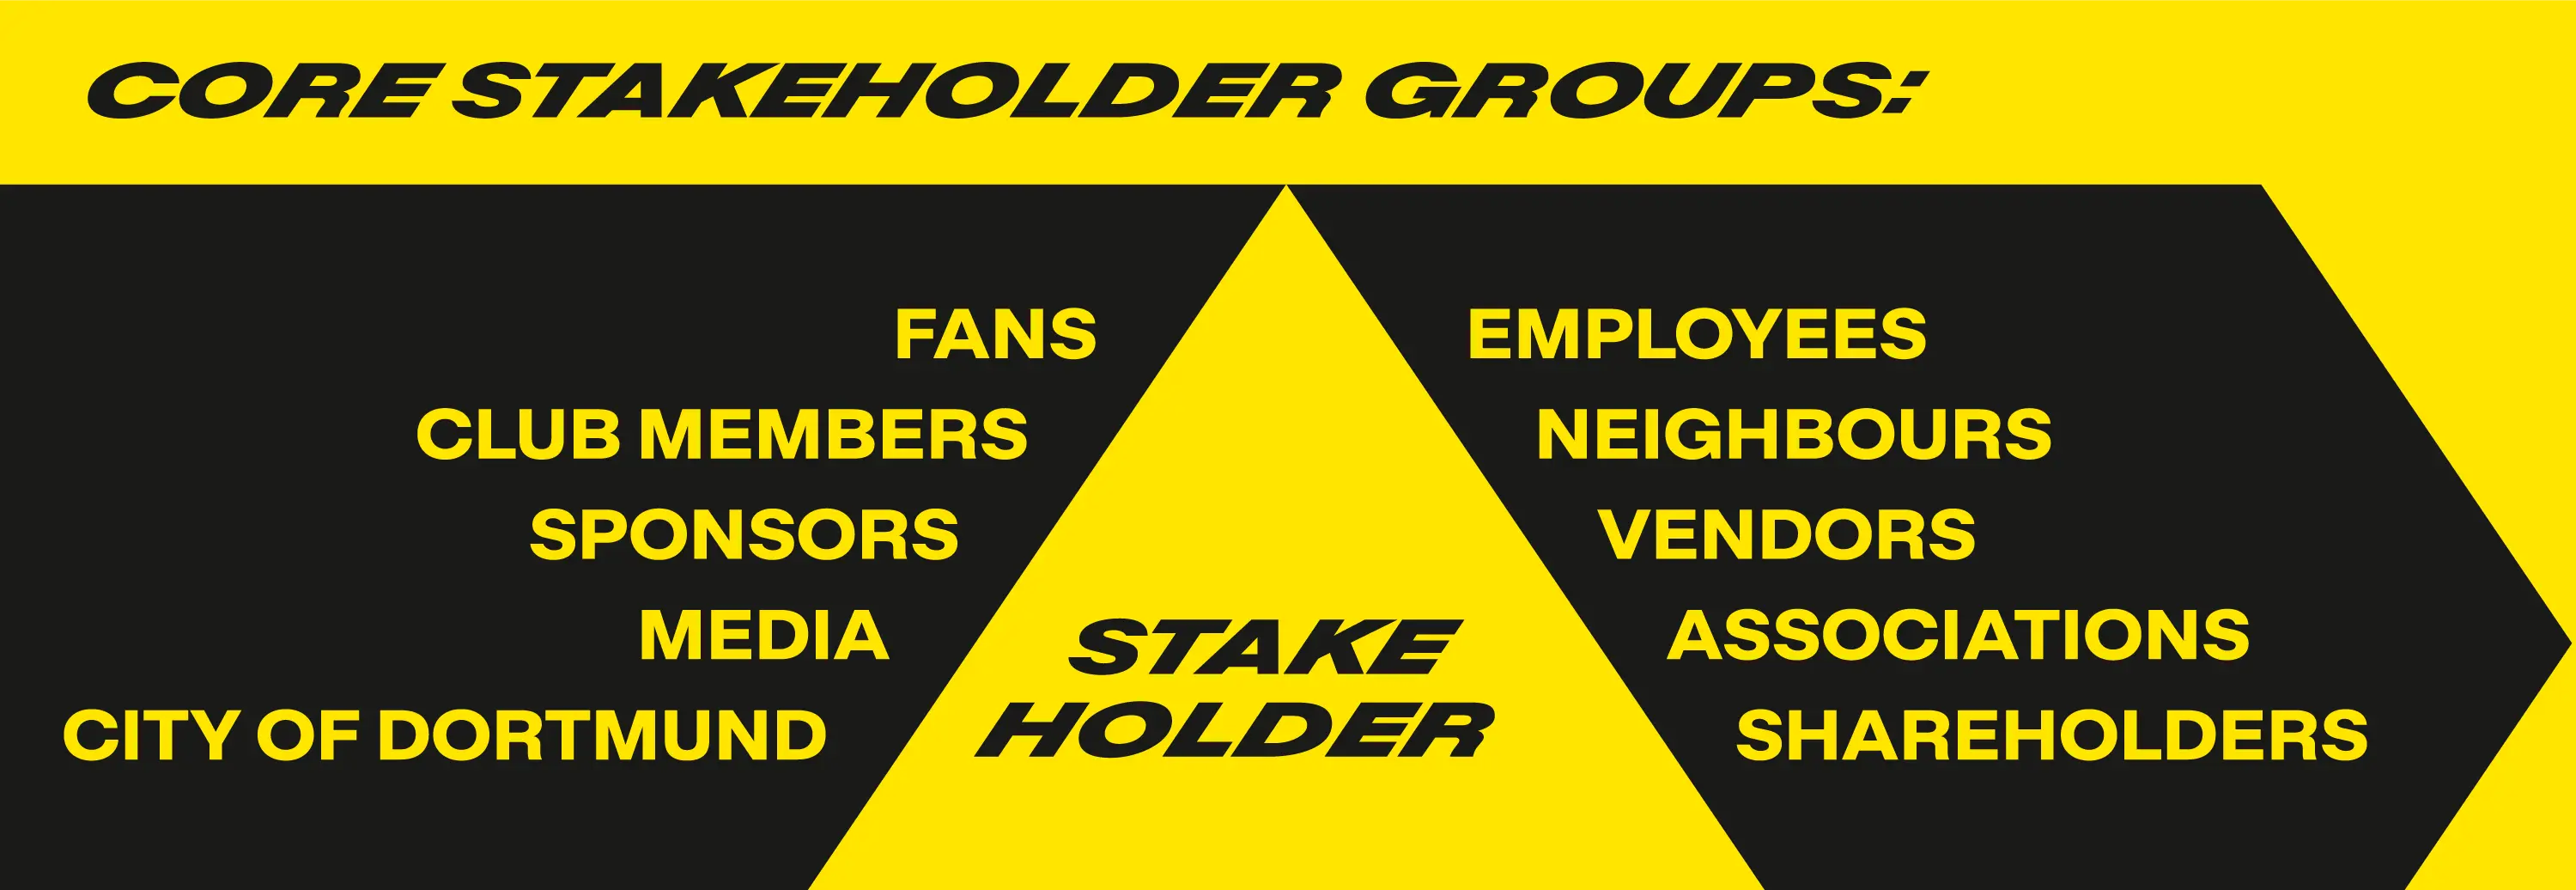 Our core stakeholder groups